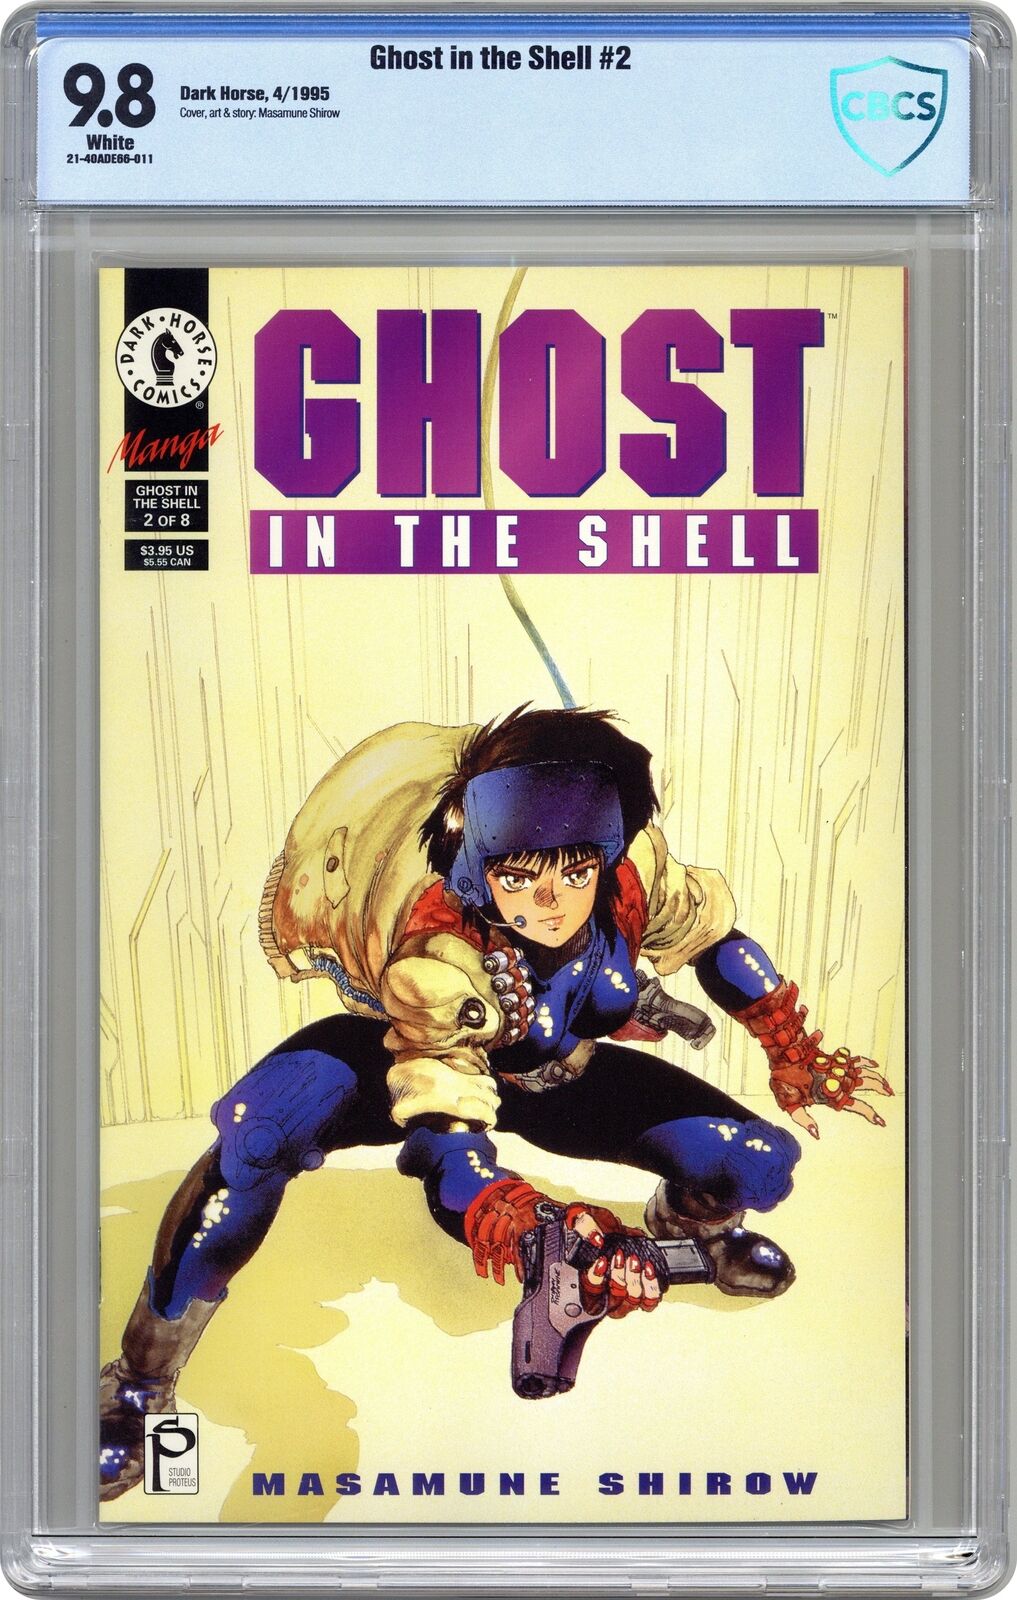 Ghost in the Shell #2 CBCS 9.8 1995 21-40ADE66-011